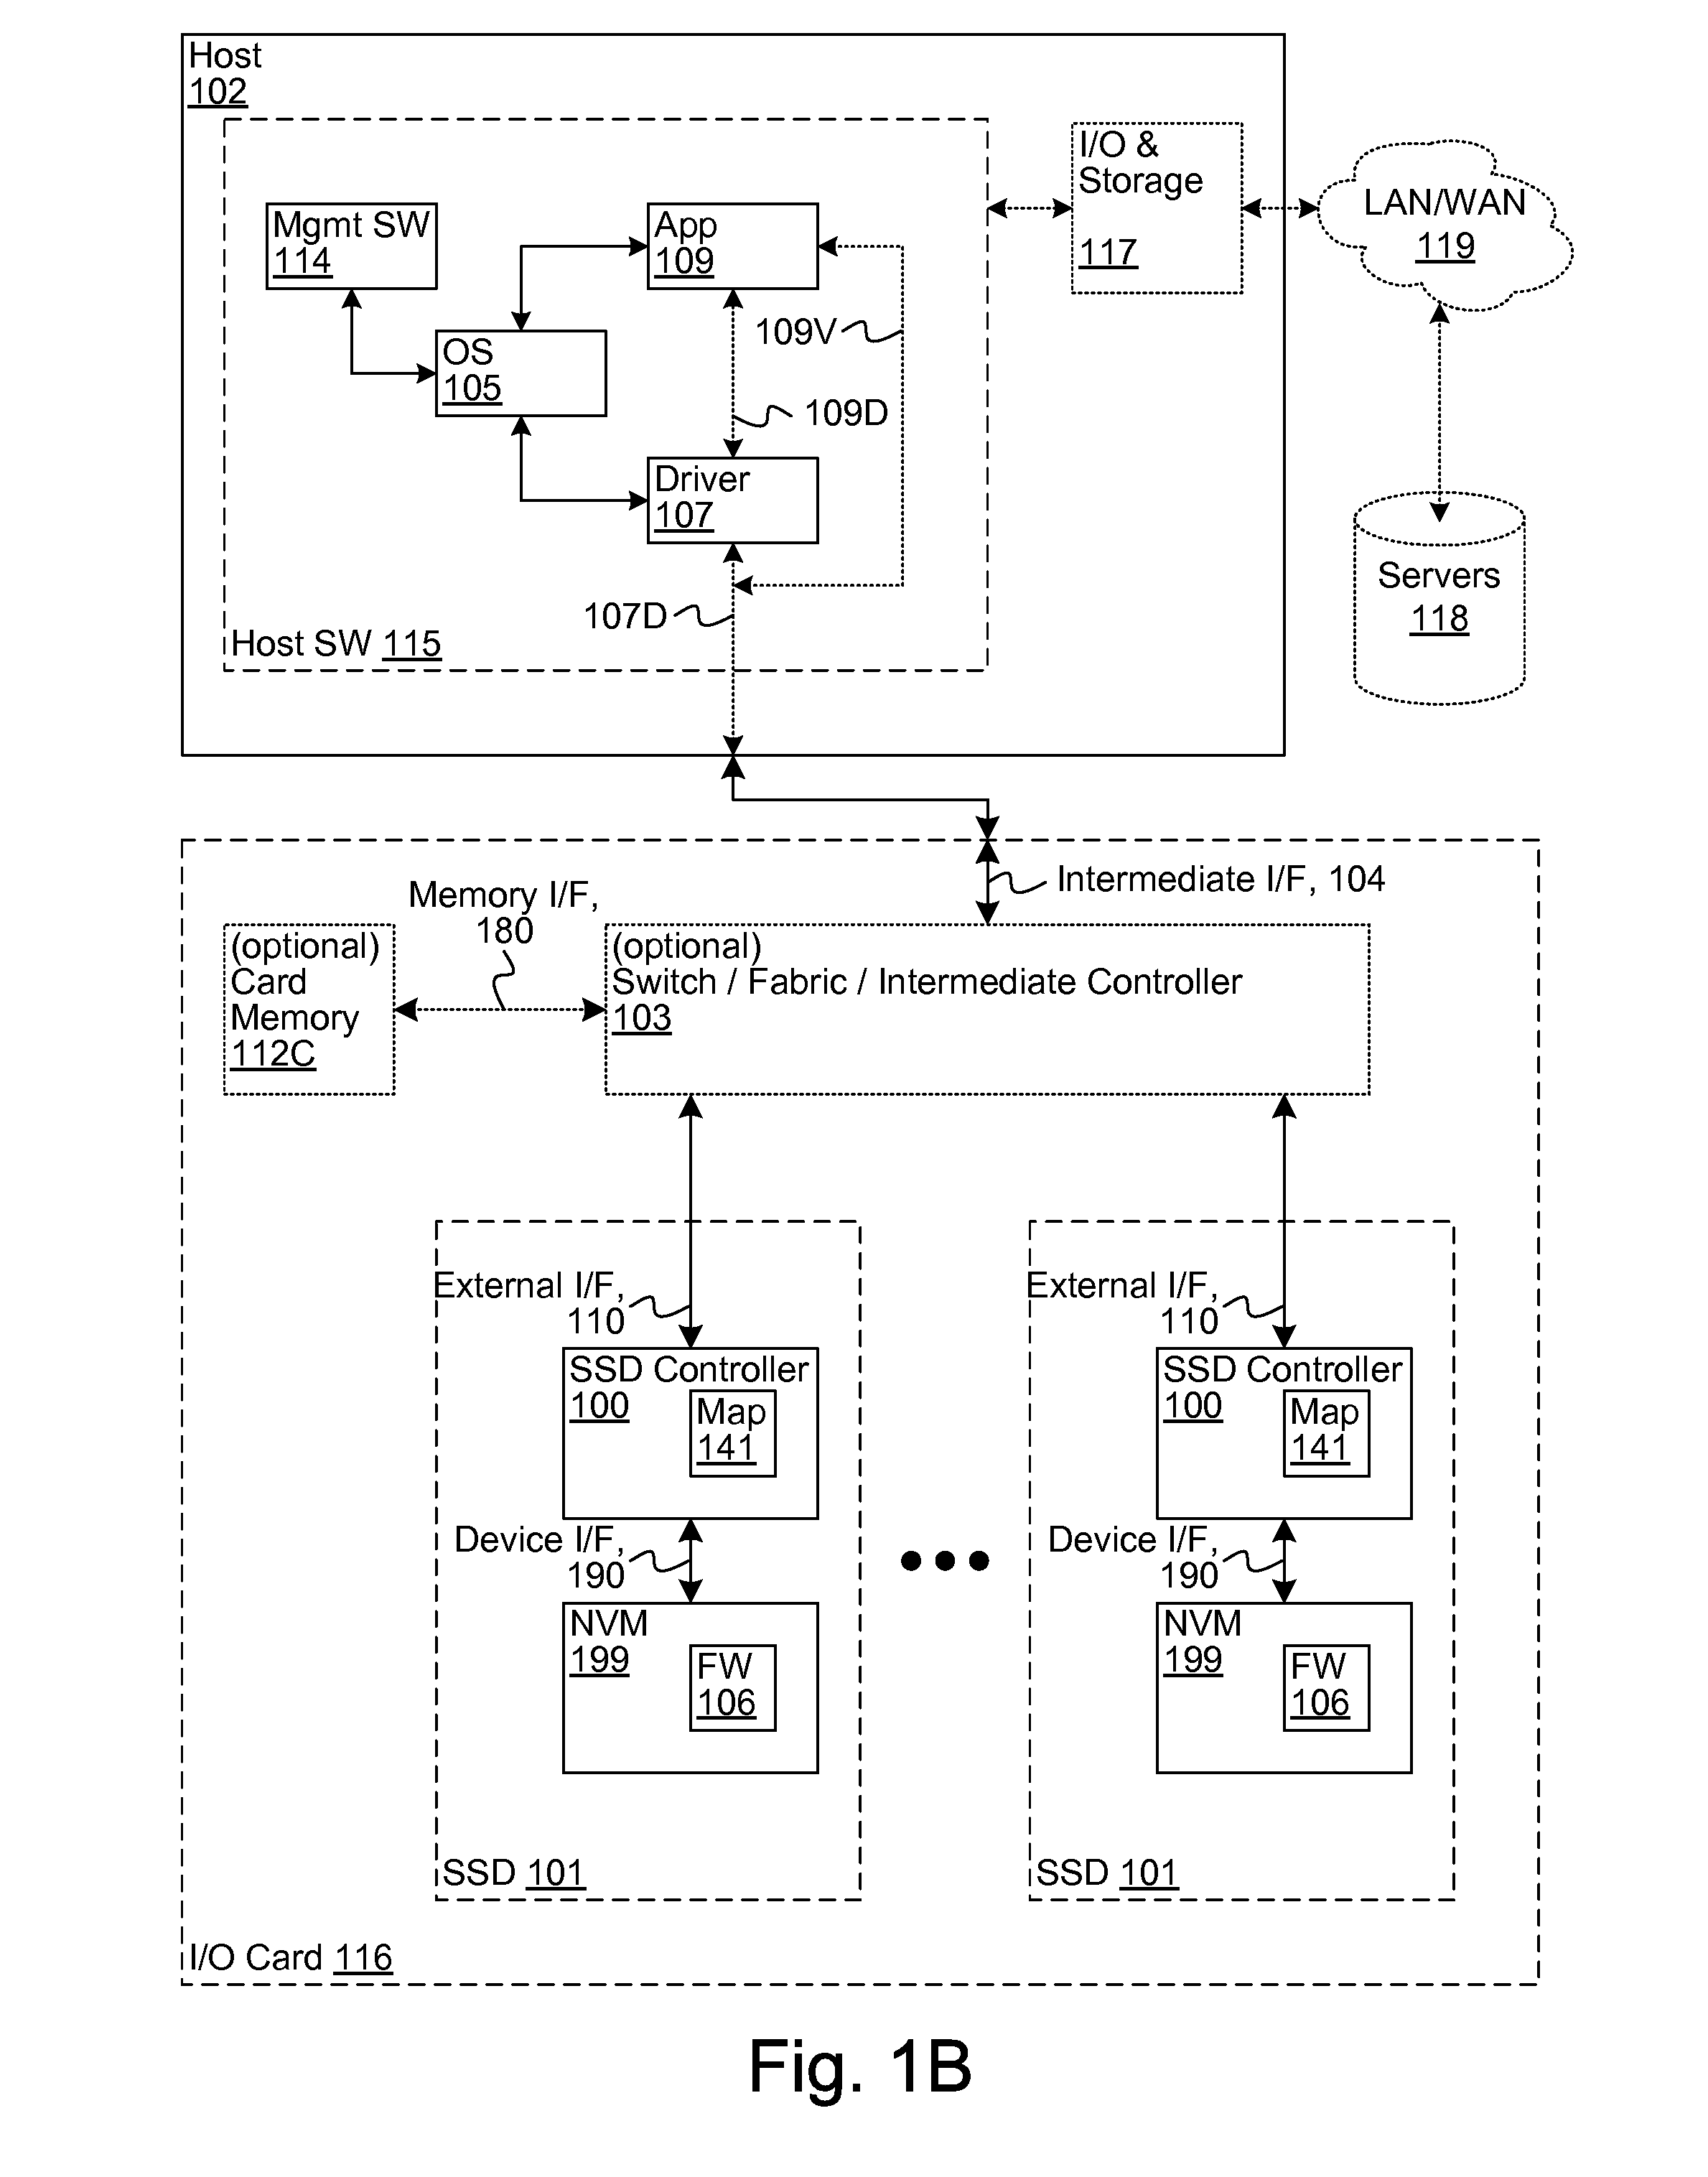 Zero-one balance management in a solid-state disk controller